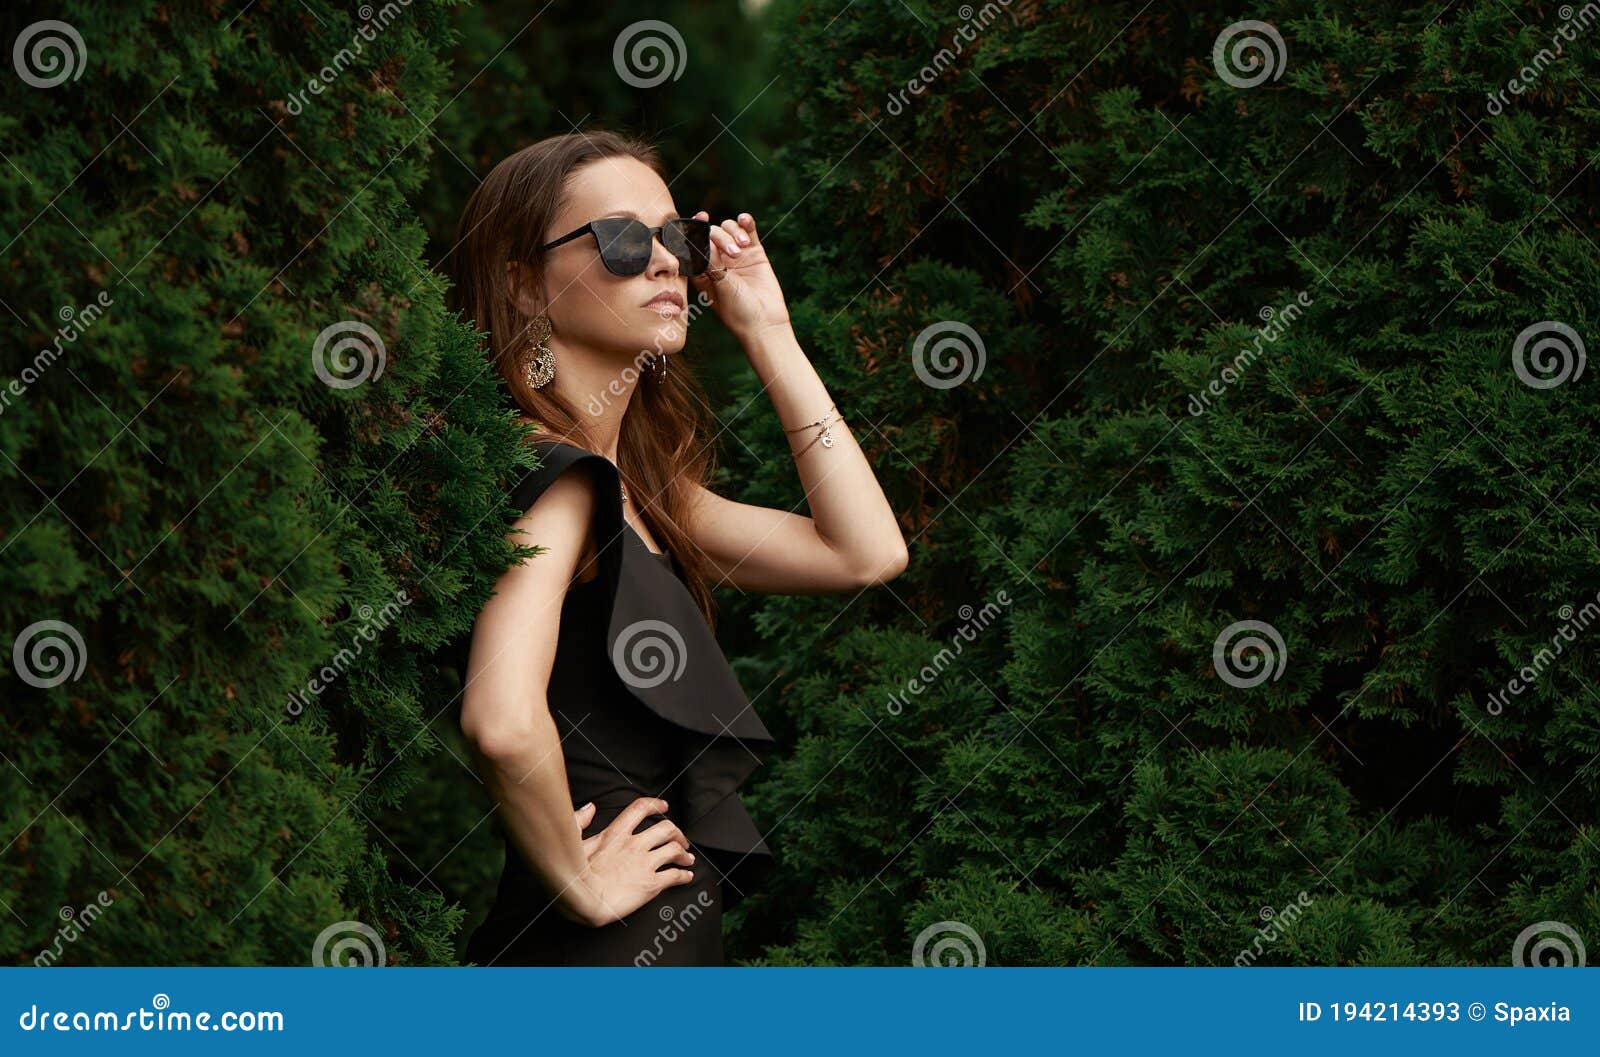 Fashionable Beautiful Woman Is Wearing Sunglasses In The Park Stock